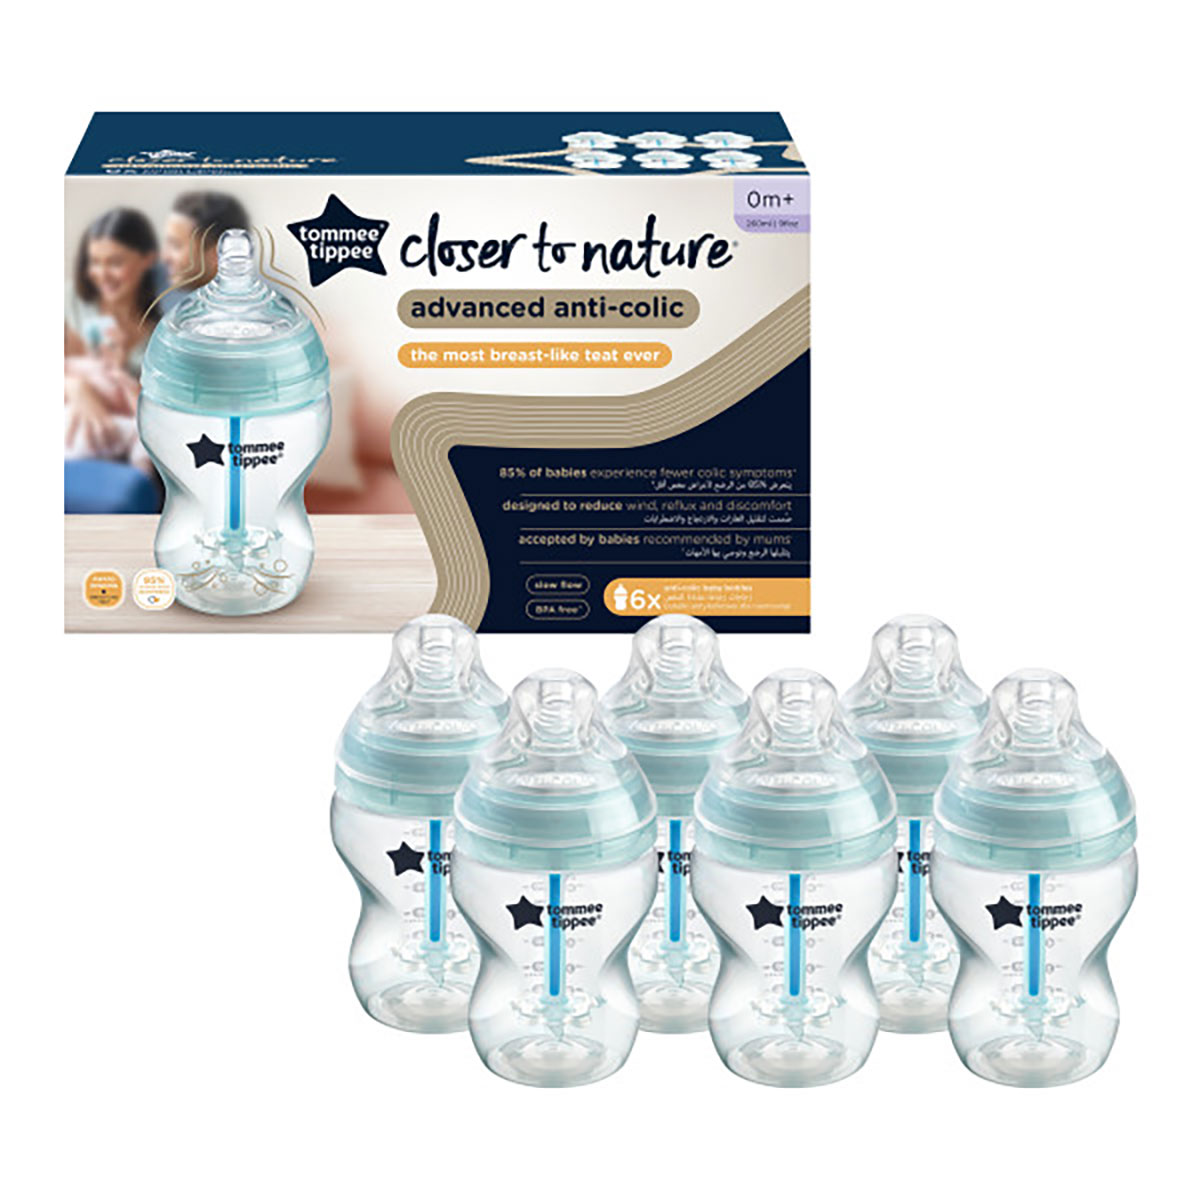 Tommee Tippee Closer to Nature Baby Bottles 9oz, 2 Count, Anti-Colic Valve  - International Society of Hypertension